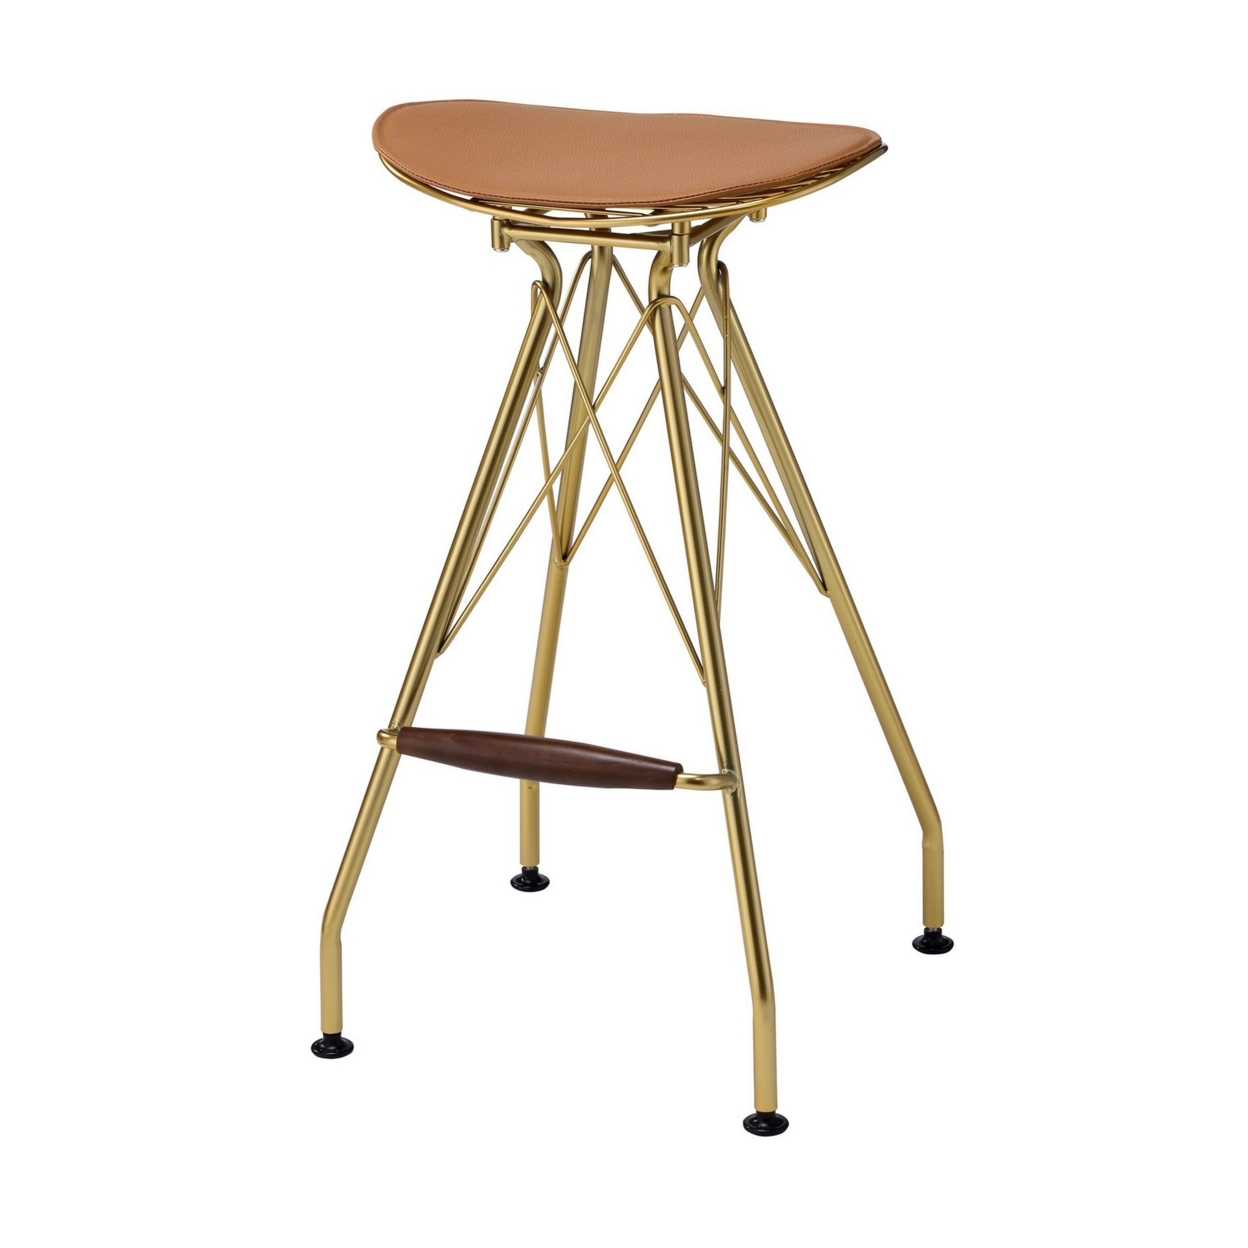 Metal Backless Barstool With Flared Legs And Braces Support, Set Of 2, Gold- Saltoro Sherpi